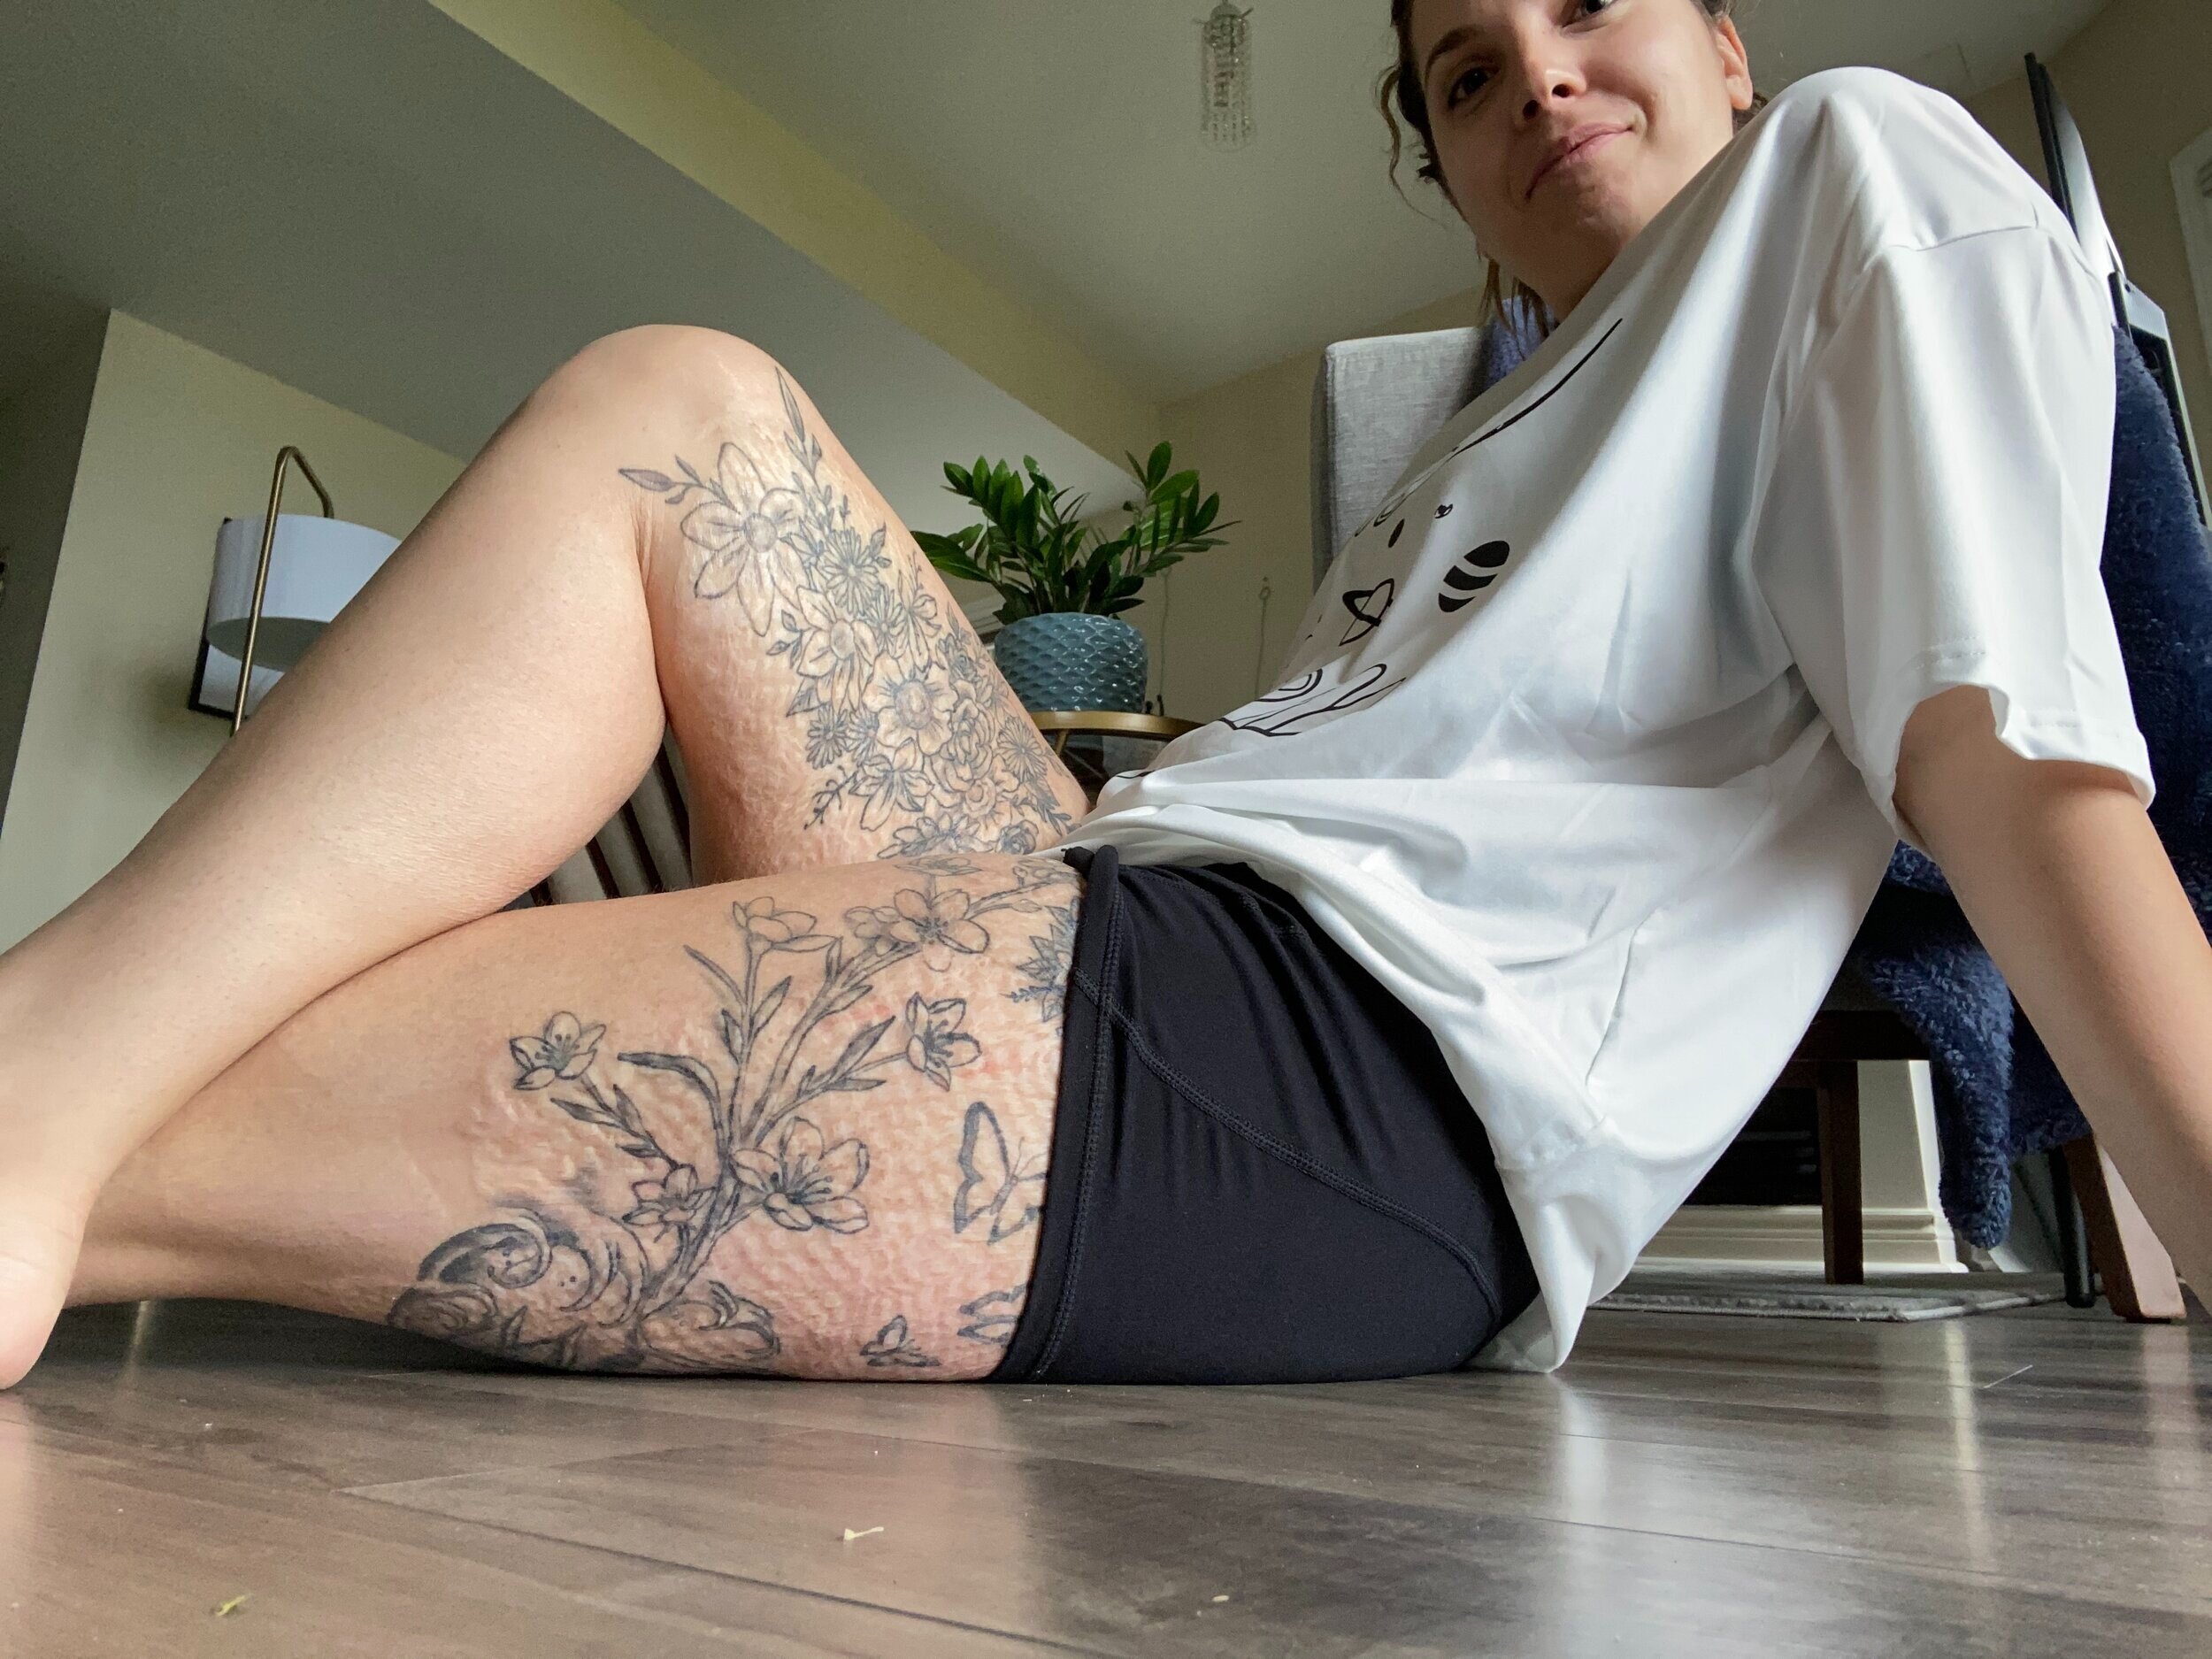  I started getting tattoos on my scars after a few years of deliberation. The tattoos have helped my confidence, and if you’re wondering, tattooing actually hurts less on the scars, at least for me!  